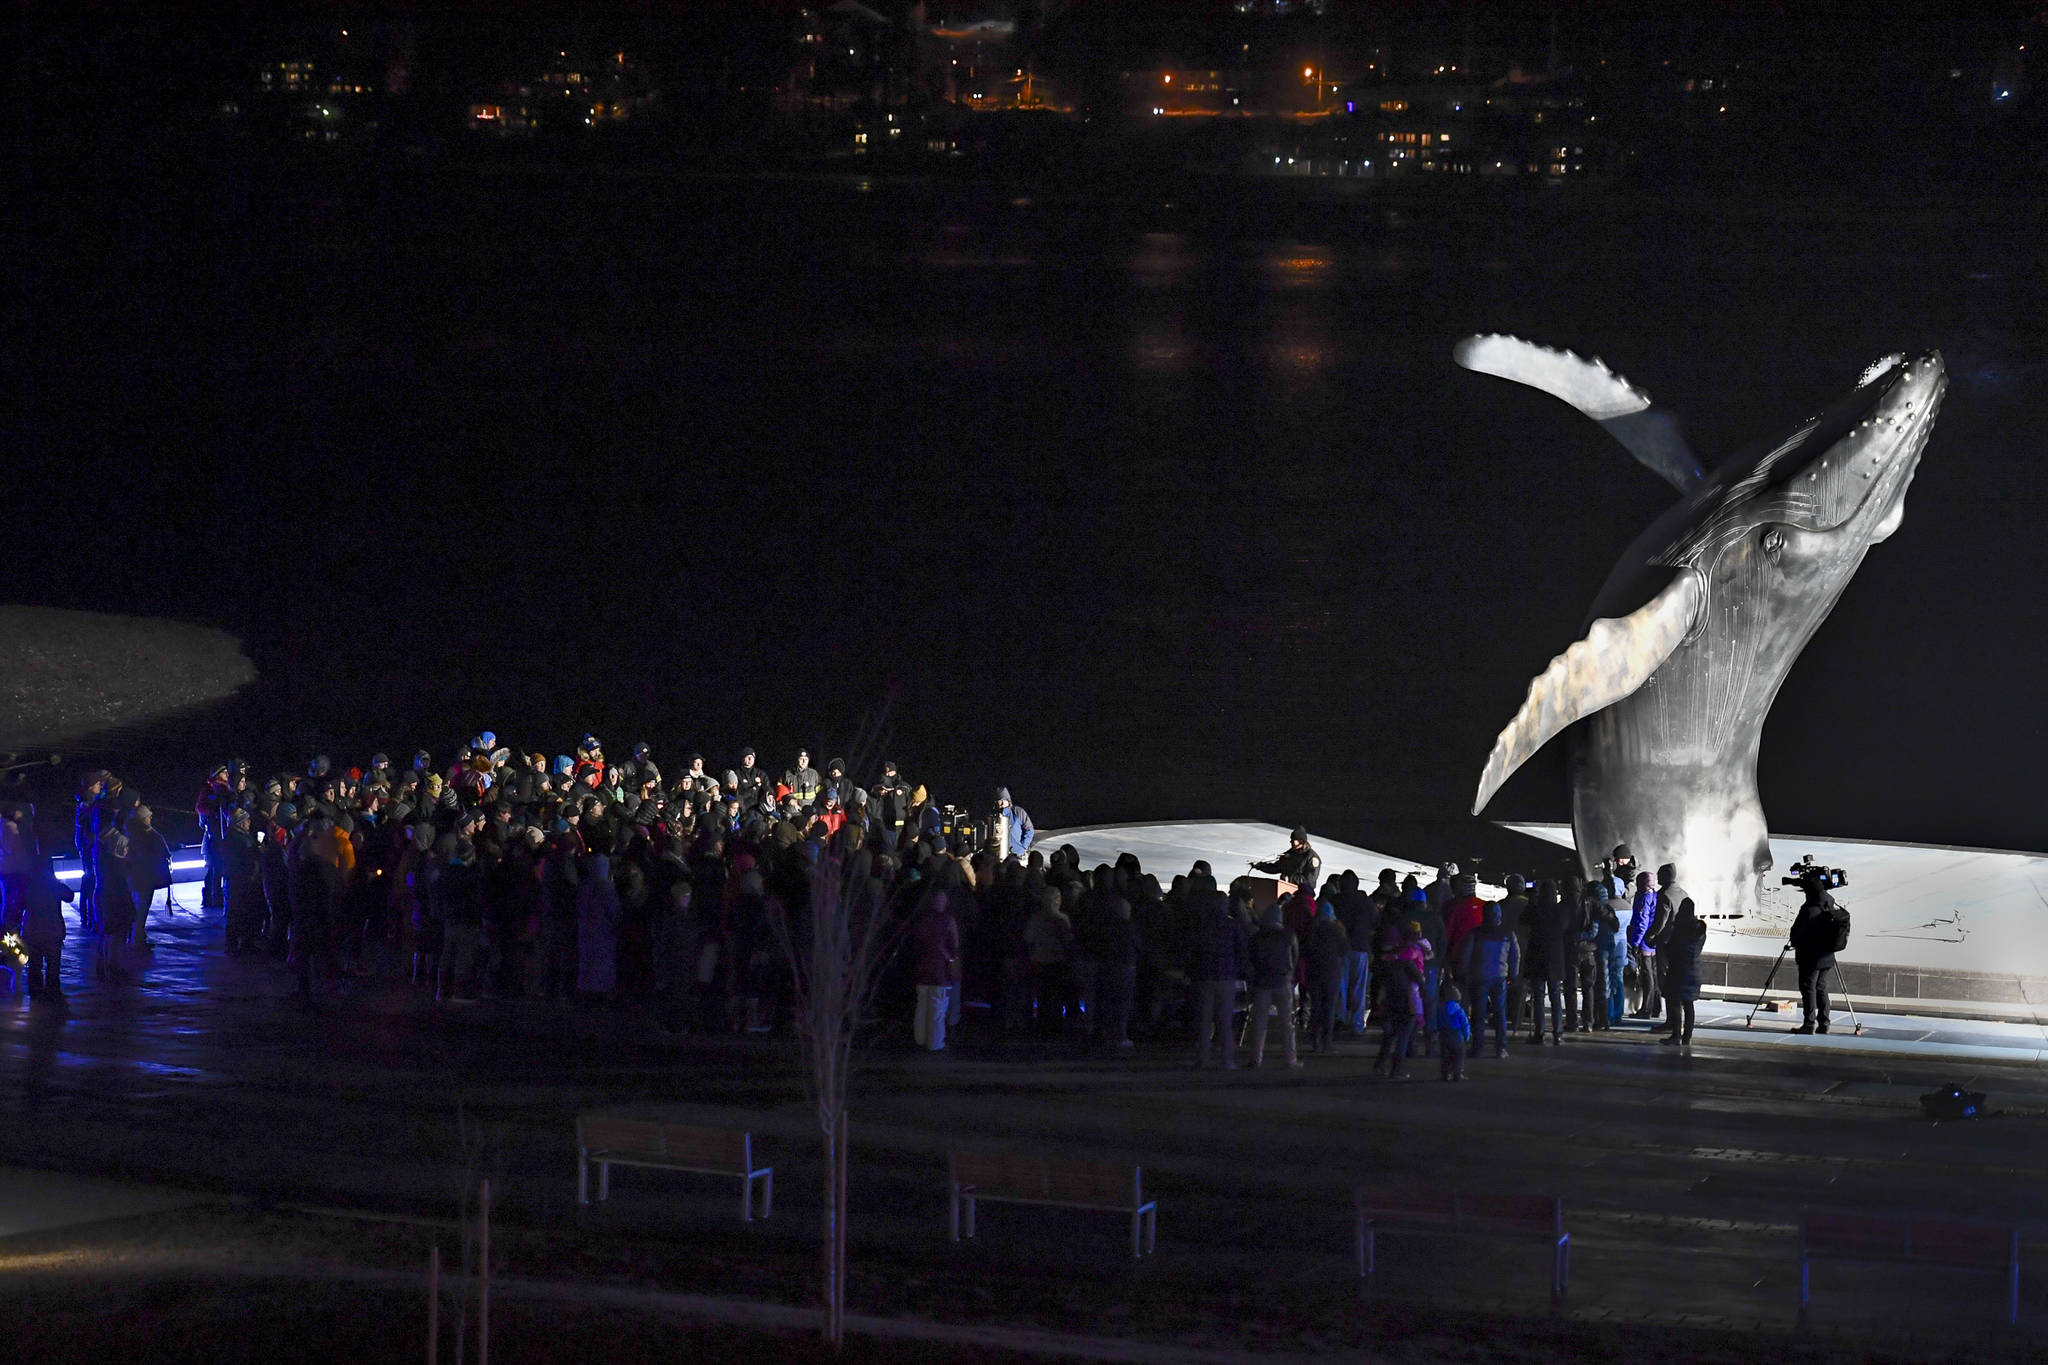 Hundreds of Juneau residents turnout Friday, Feb. 1, 2019, in 8F degree weather for a candlelight vigil at Mayor Bill Overstreet Park for the Guardian medical flight crew that went missing this week. (Michael Penn | Juneau Empire)